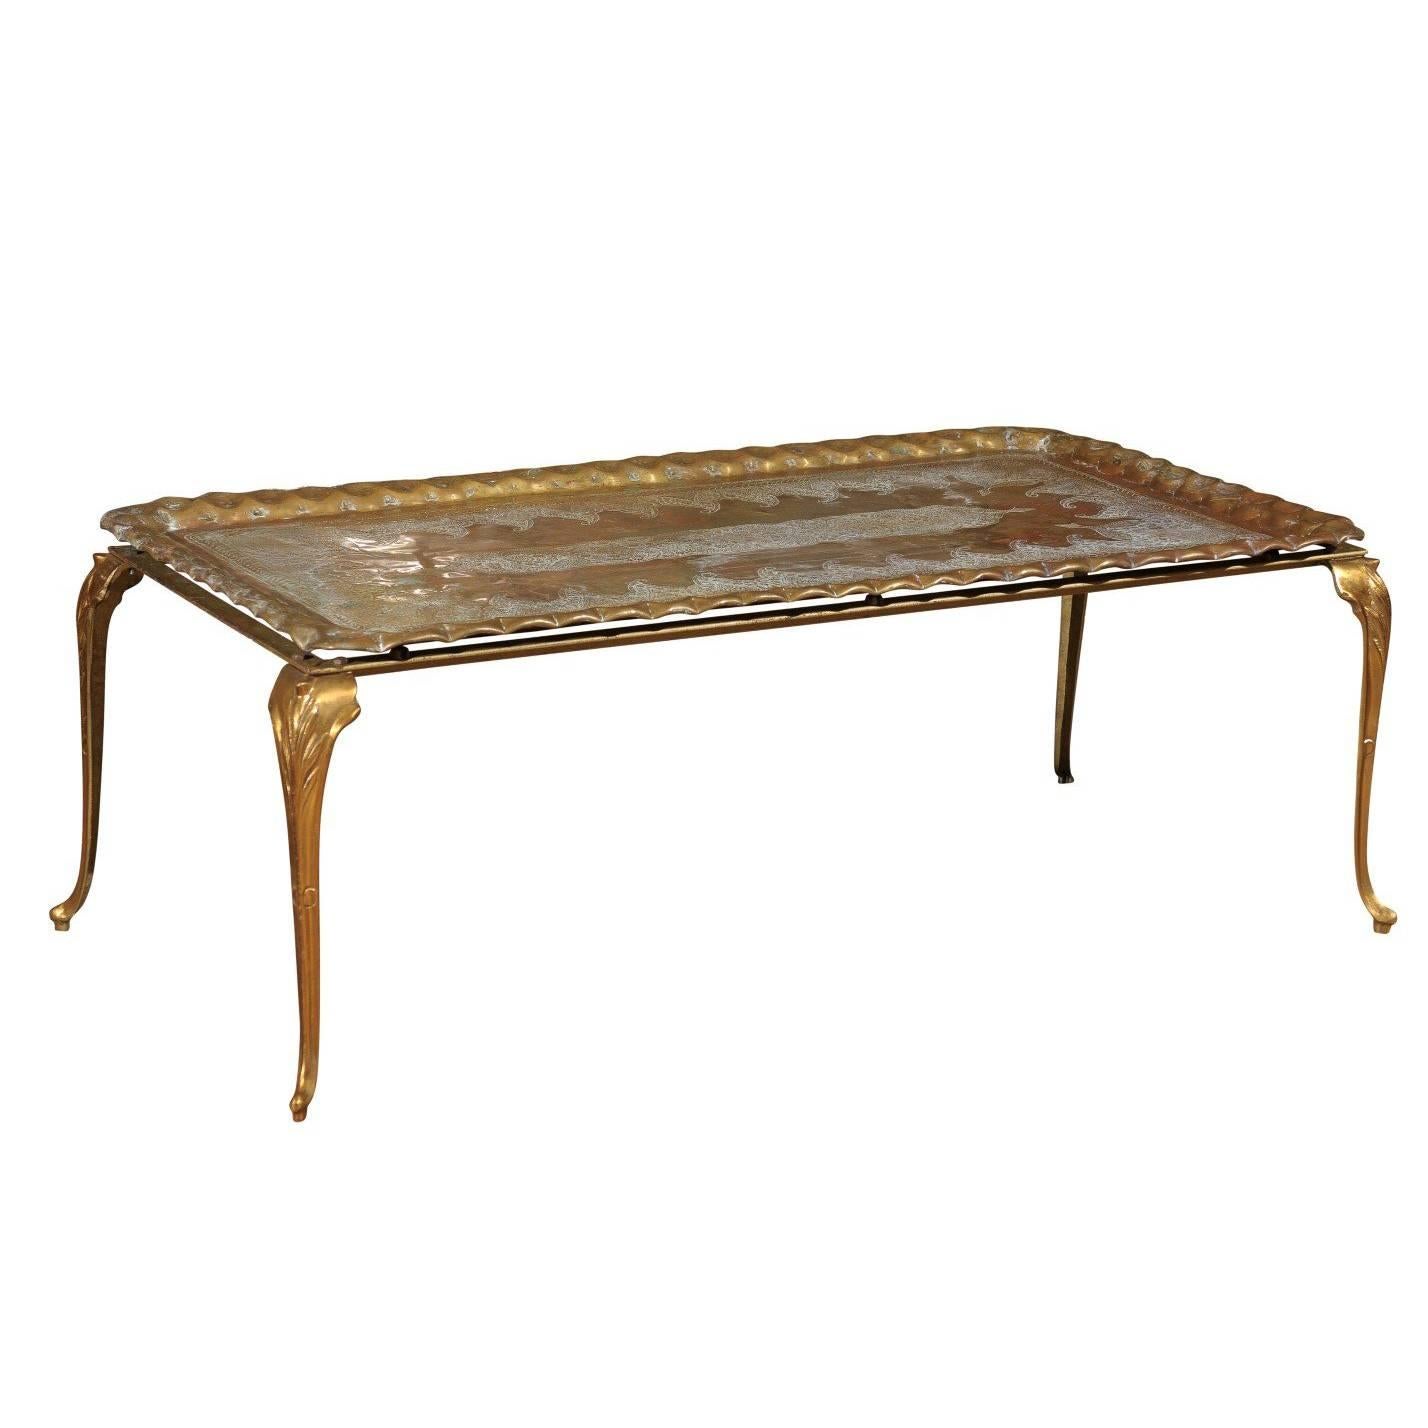 Vintage Etched and Hammered Brass Tray Table